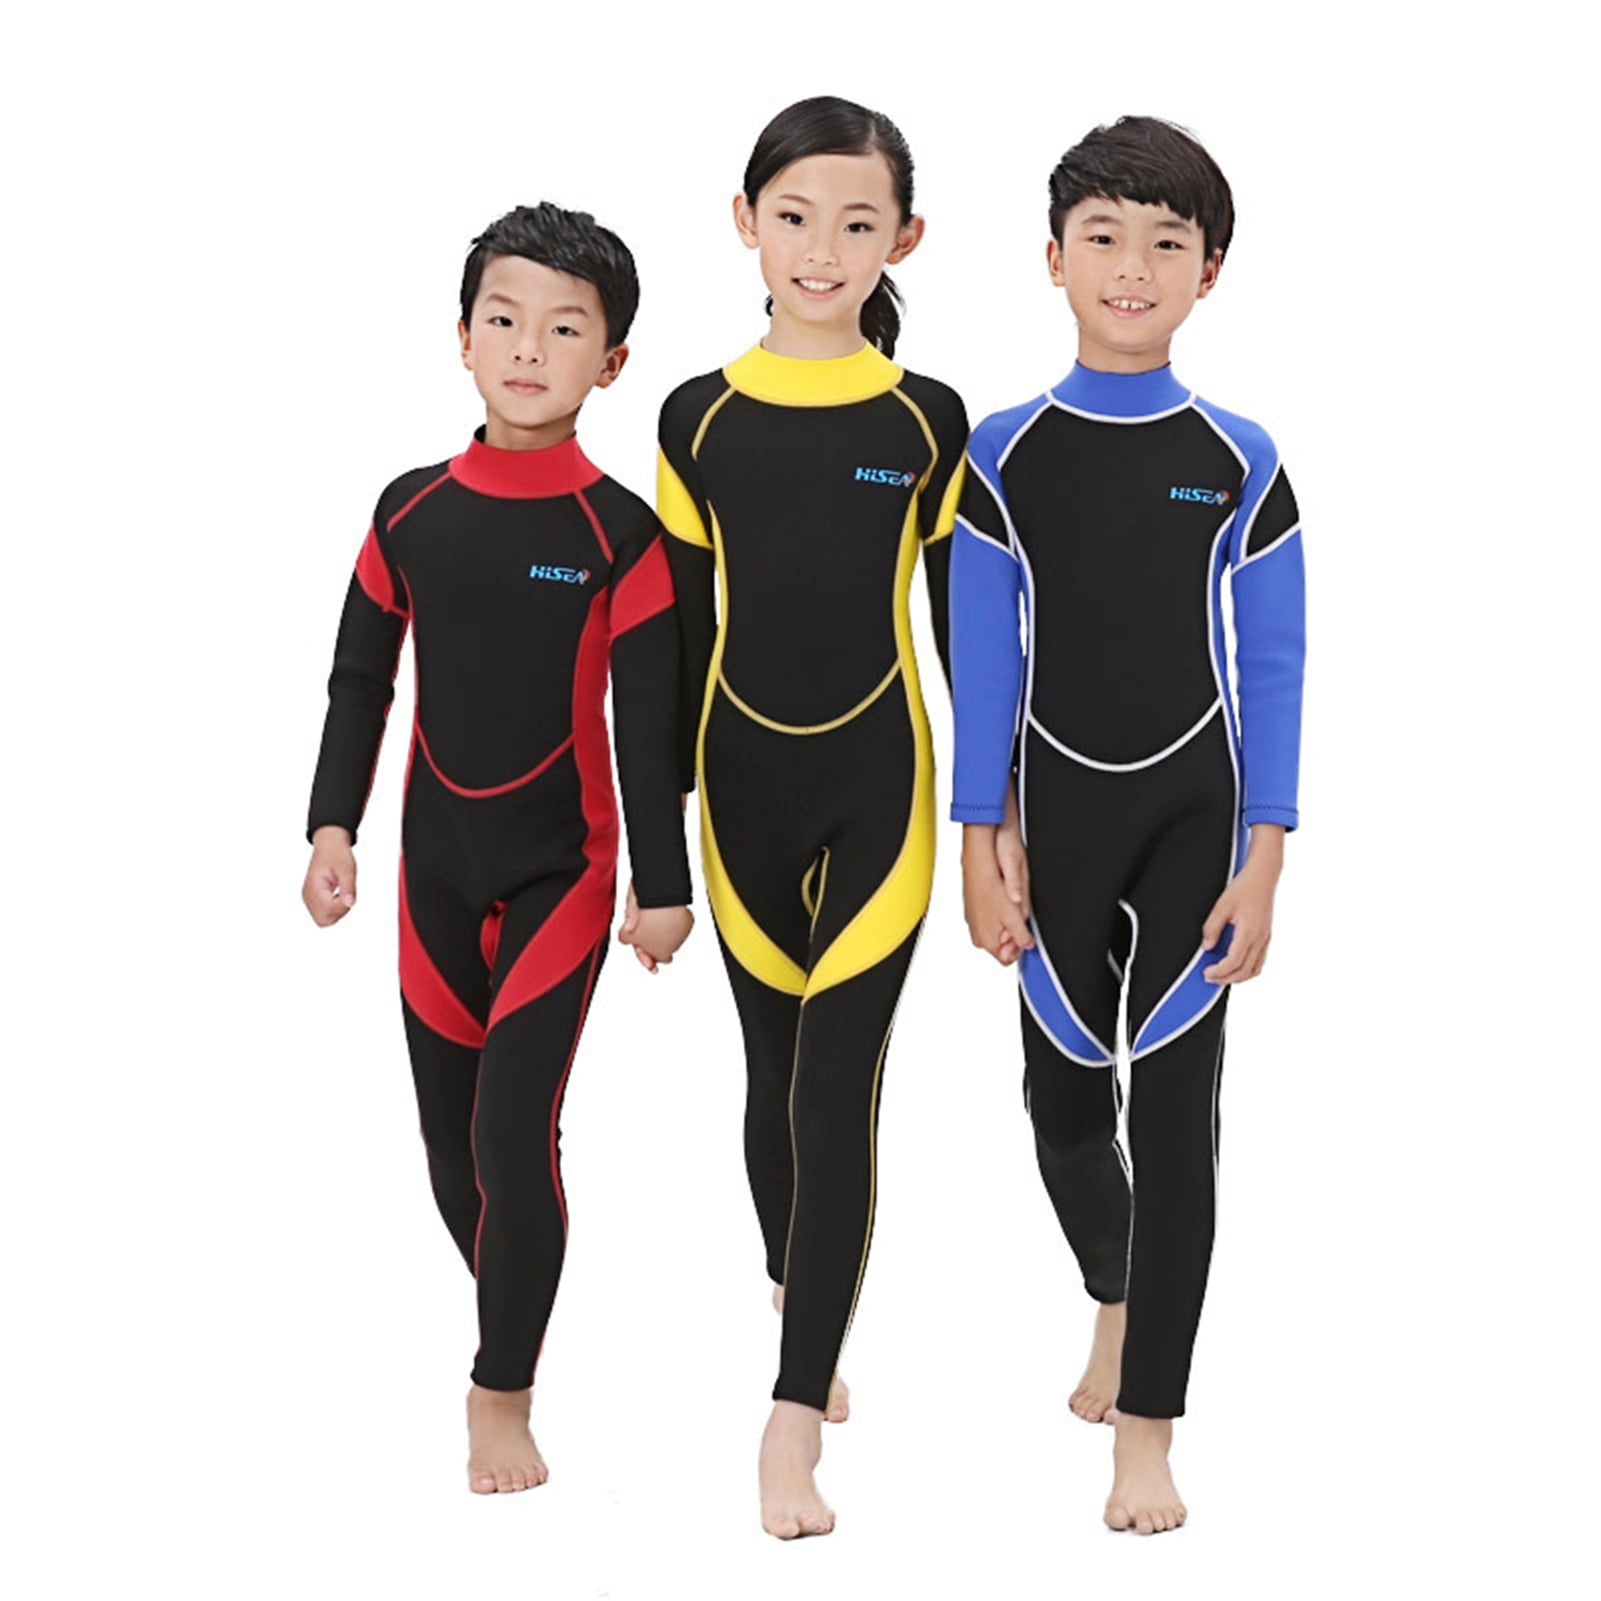 Romacci Women Full Wetsuit Surfing Suit One Piece Long Sleeve Surfing Diving Body Boarding Swimsuit 